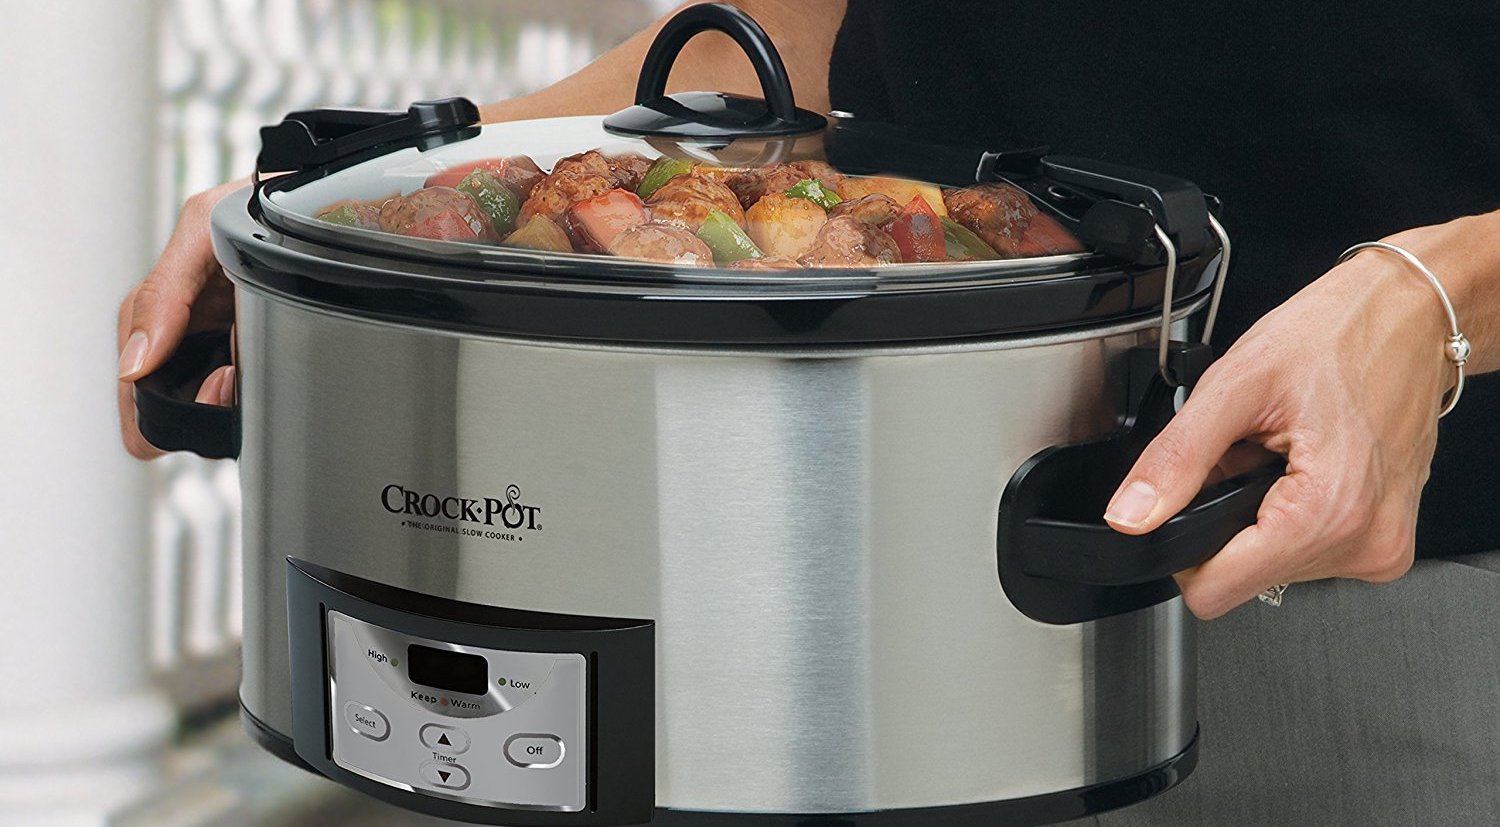 The best-selling stainless steel Crock-Pot 6-Quart Cook and Carry Oval Slow  Cooker $34 Prime shipped (Reg. $48+)